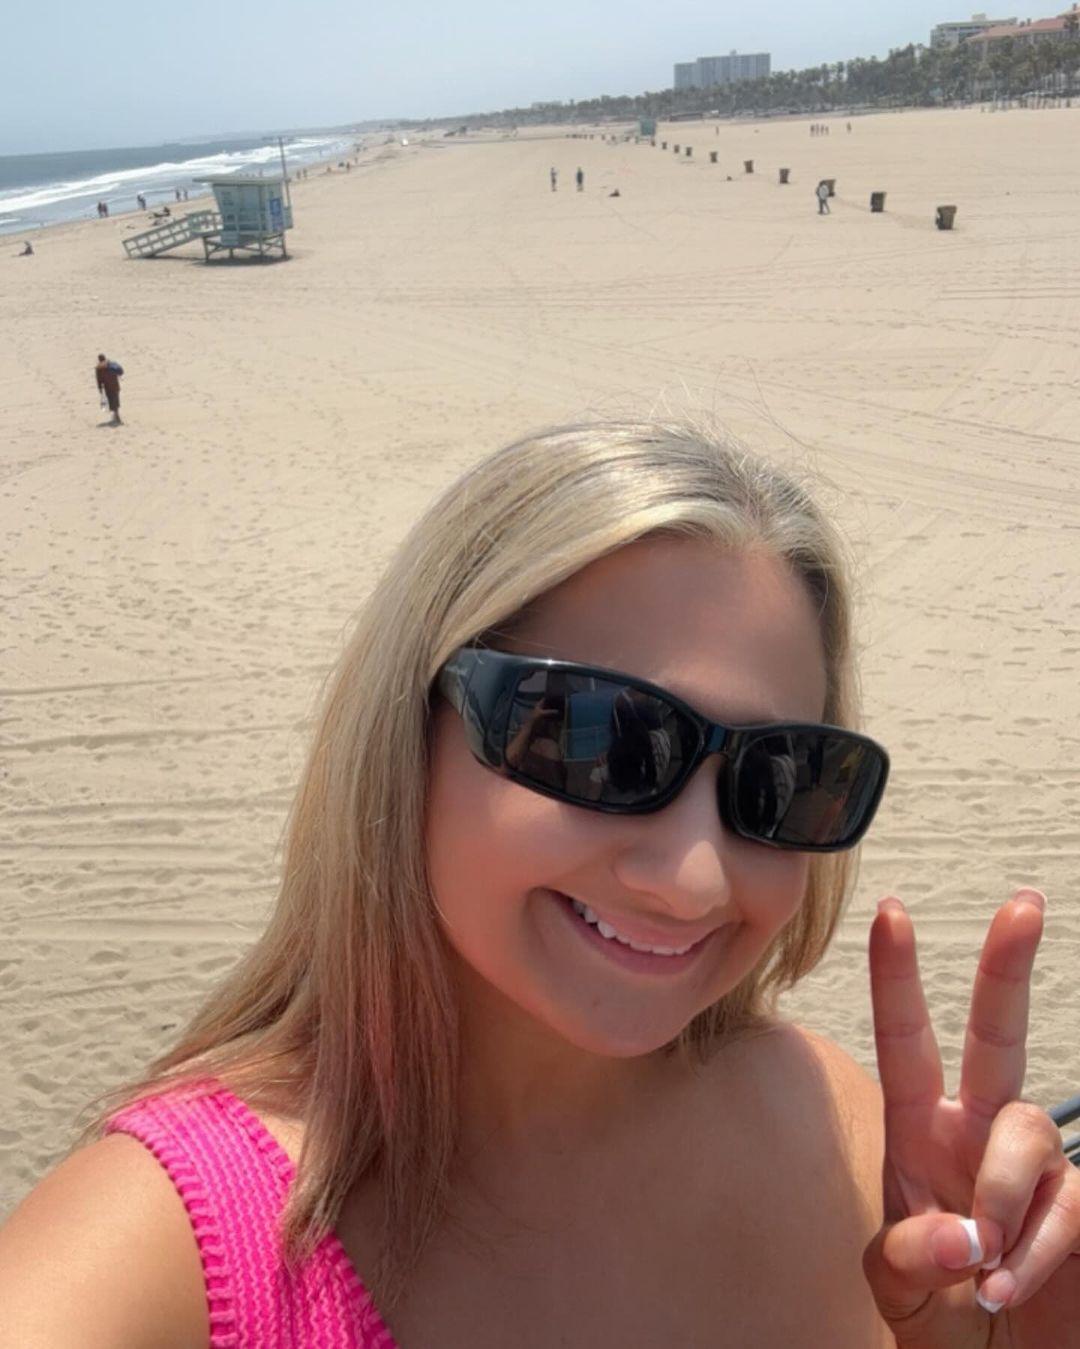 Gypsy Rose Blanchard takes a selfie on the beach.